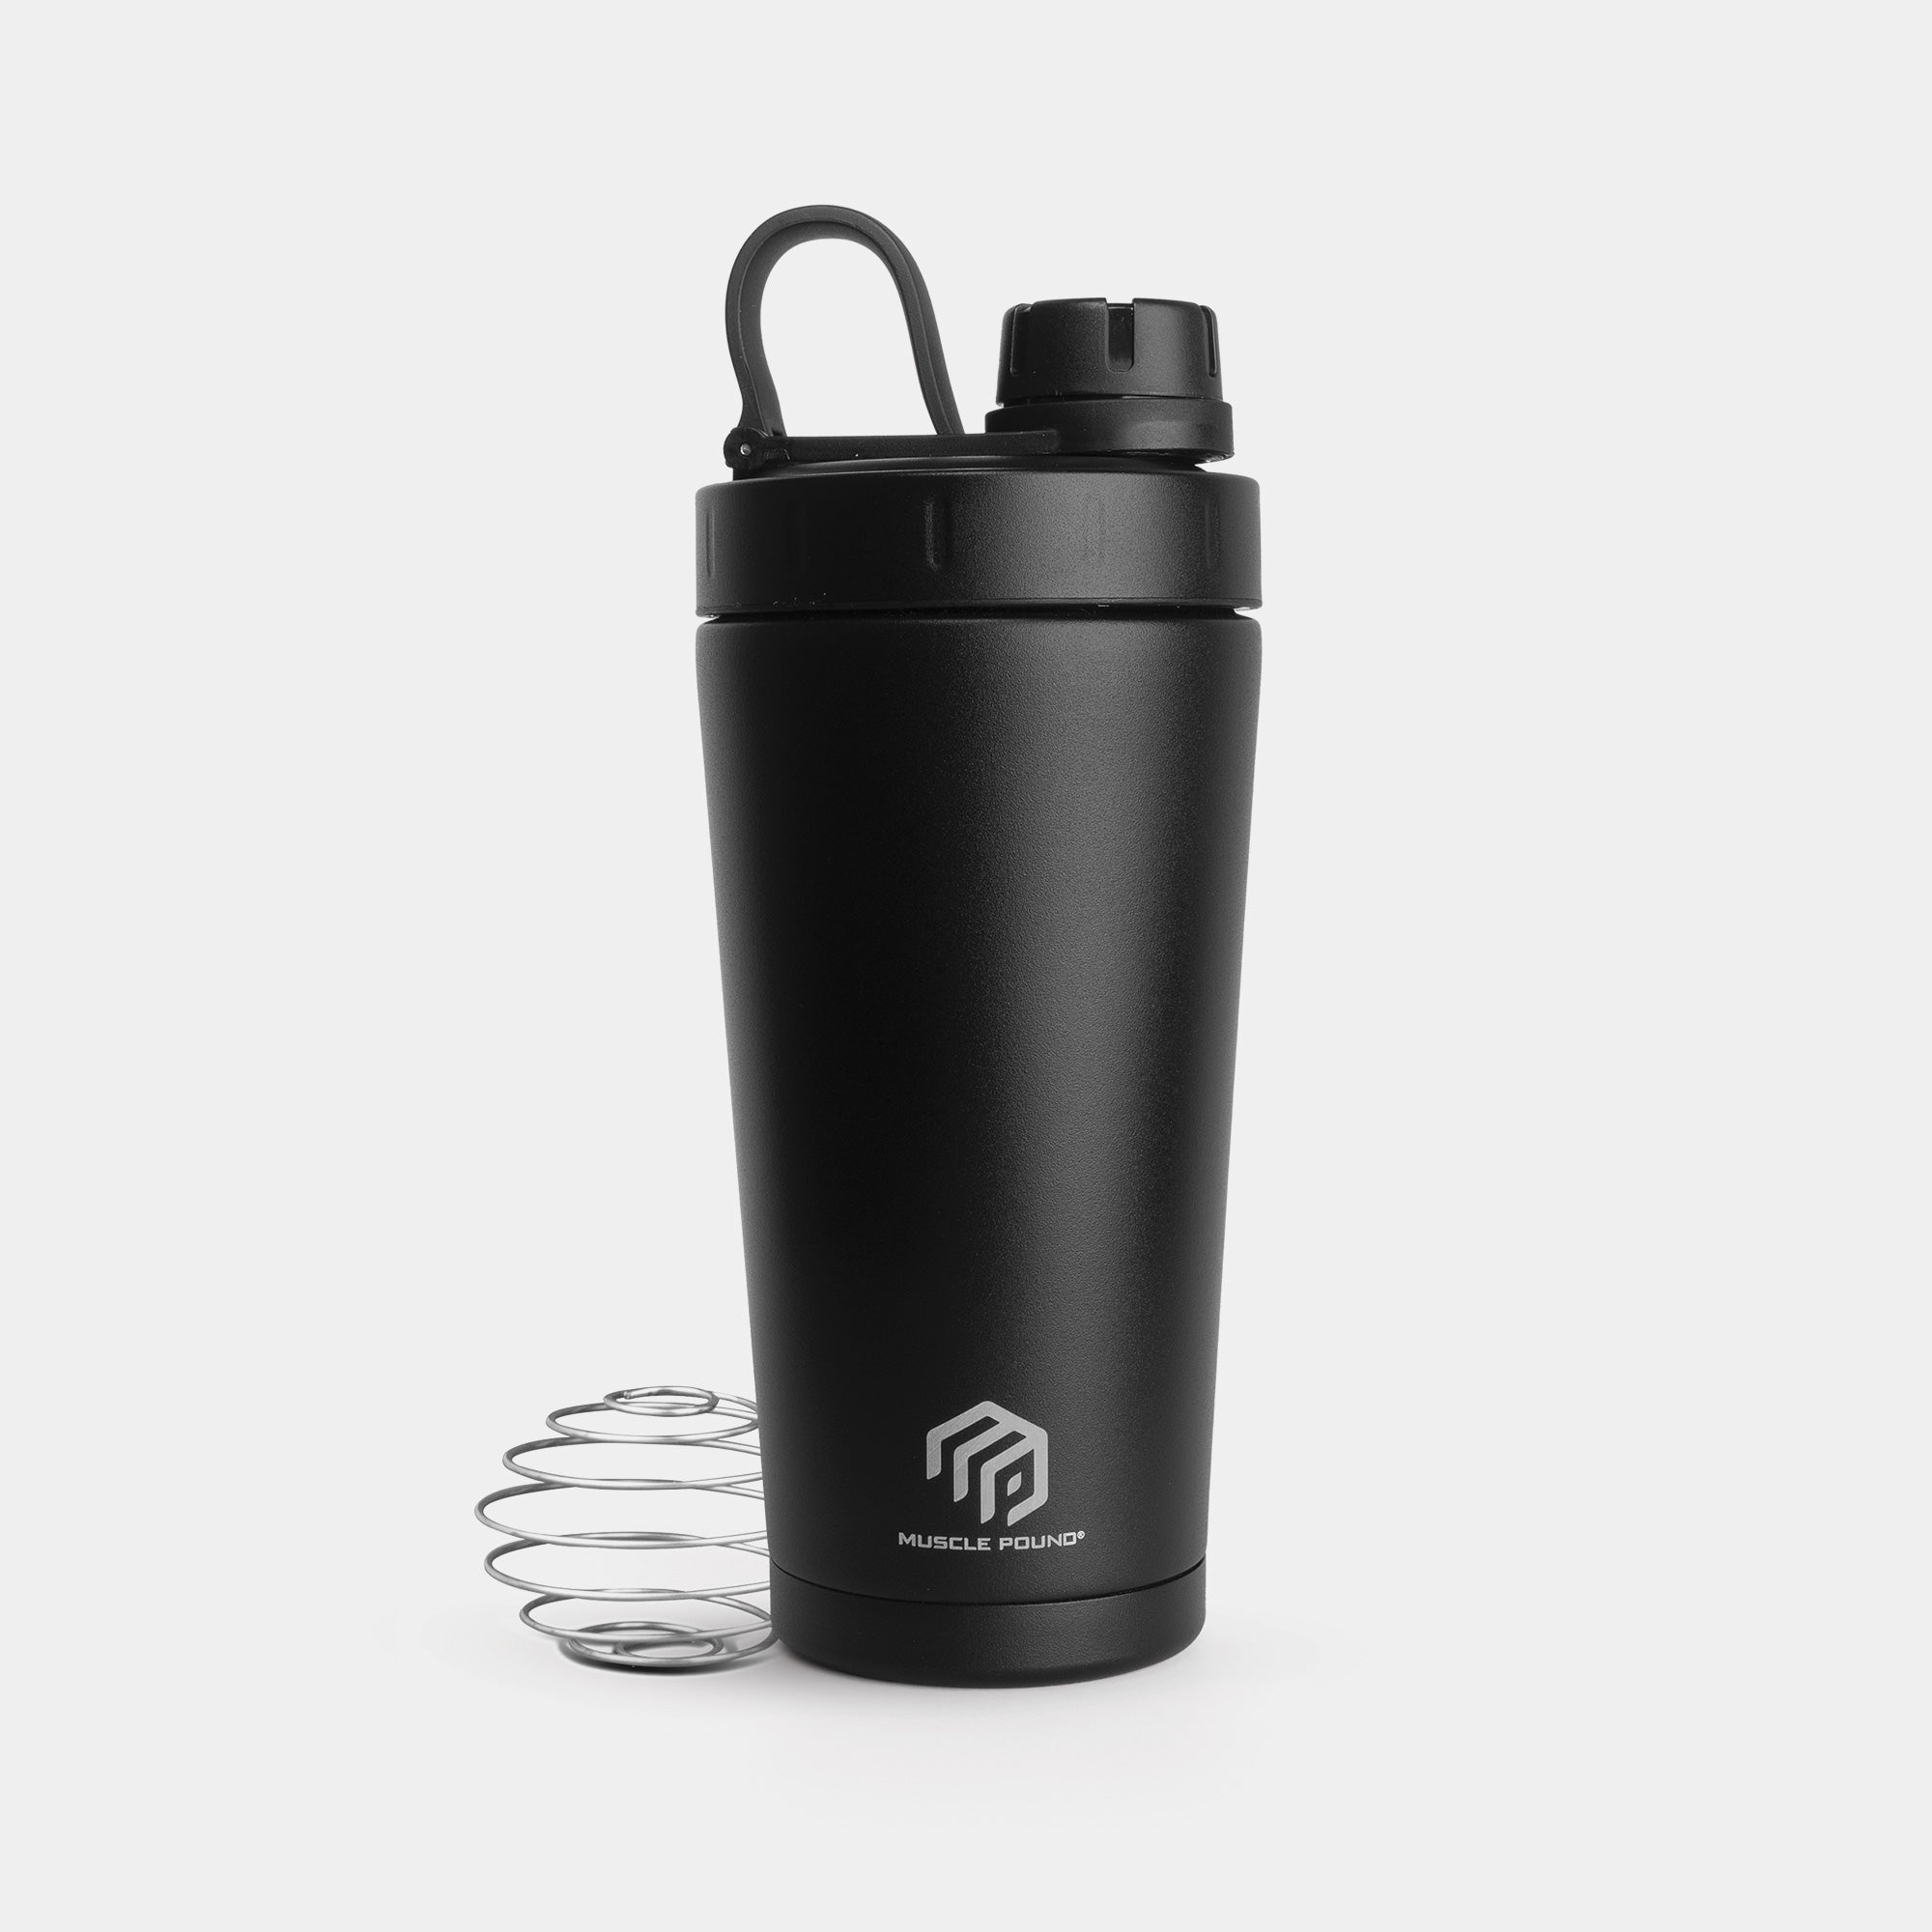 Easily measure and mix your protein shake in our white insulated shaker bottle.